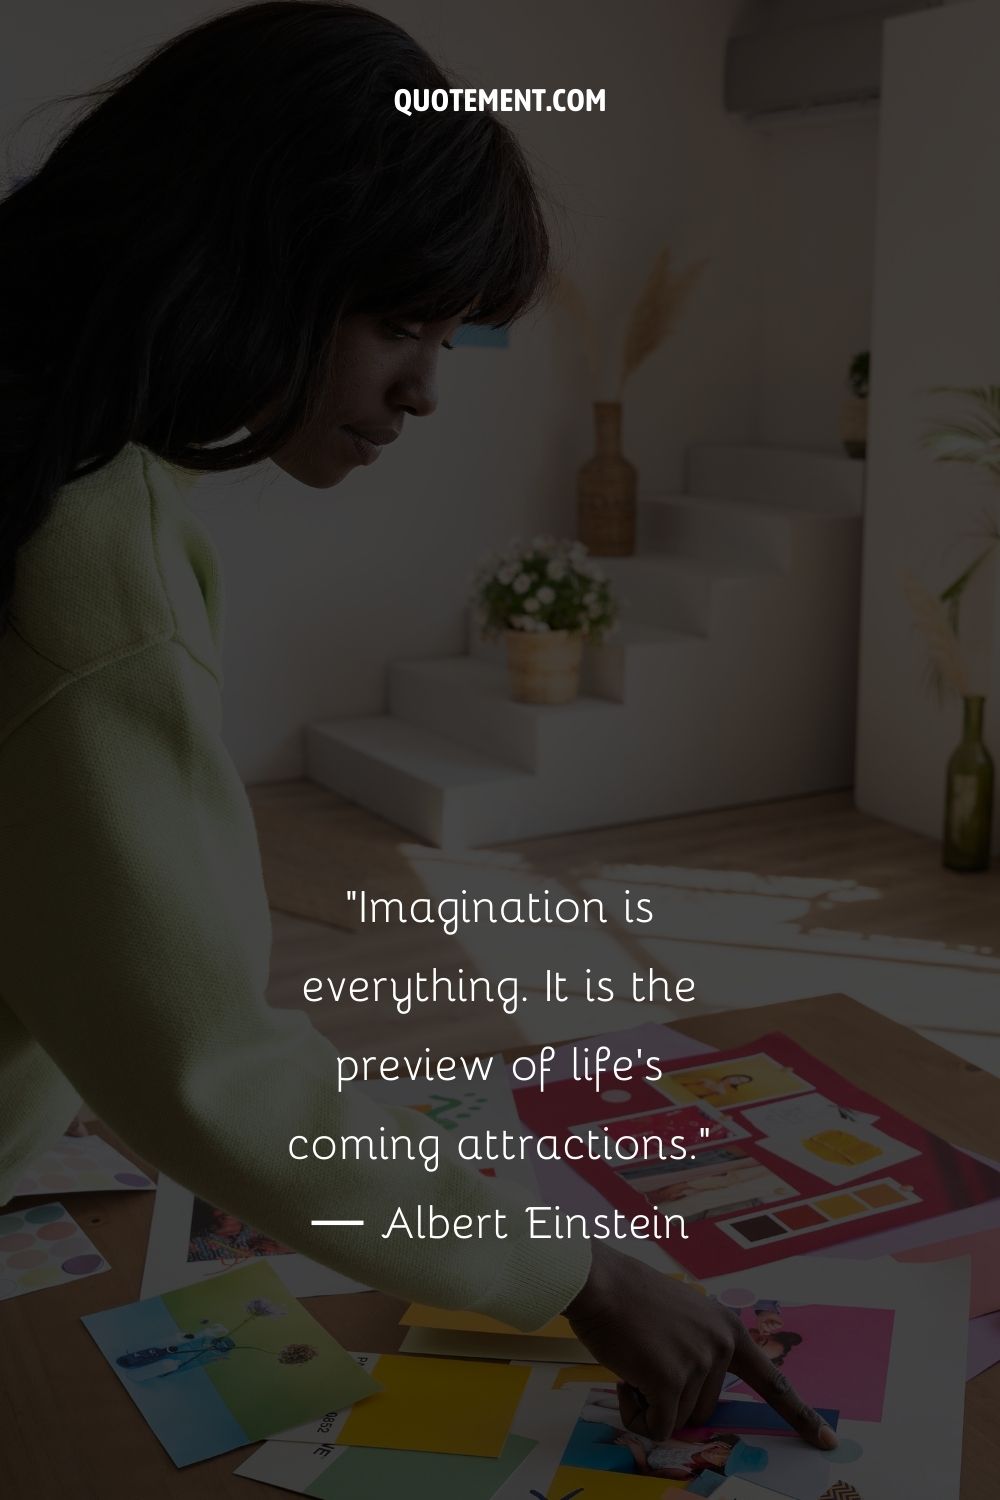 Imagination is everything.